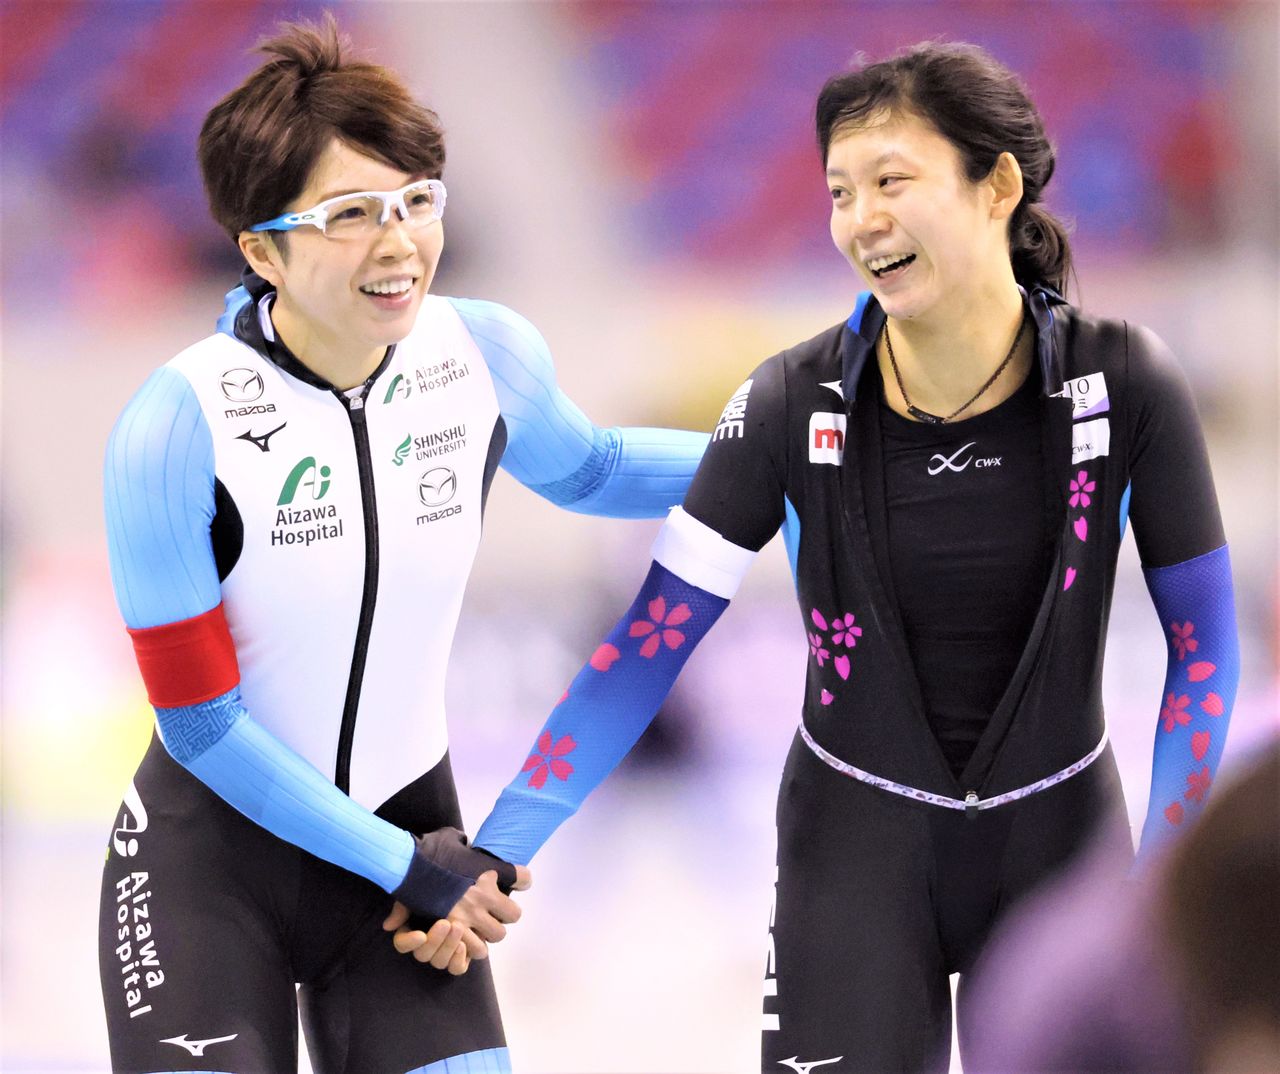 Takagi Miho (right) after winning the 1,500 meter, defeating Kodaira Nao (third place), at the Olympic team trials on December 31, 2021, at the M-Wave rink in Nagano. (© Jiji)